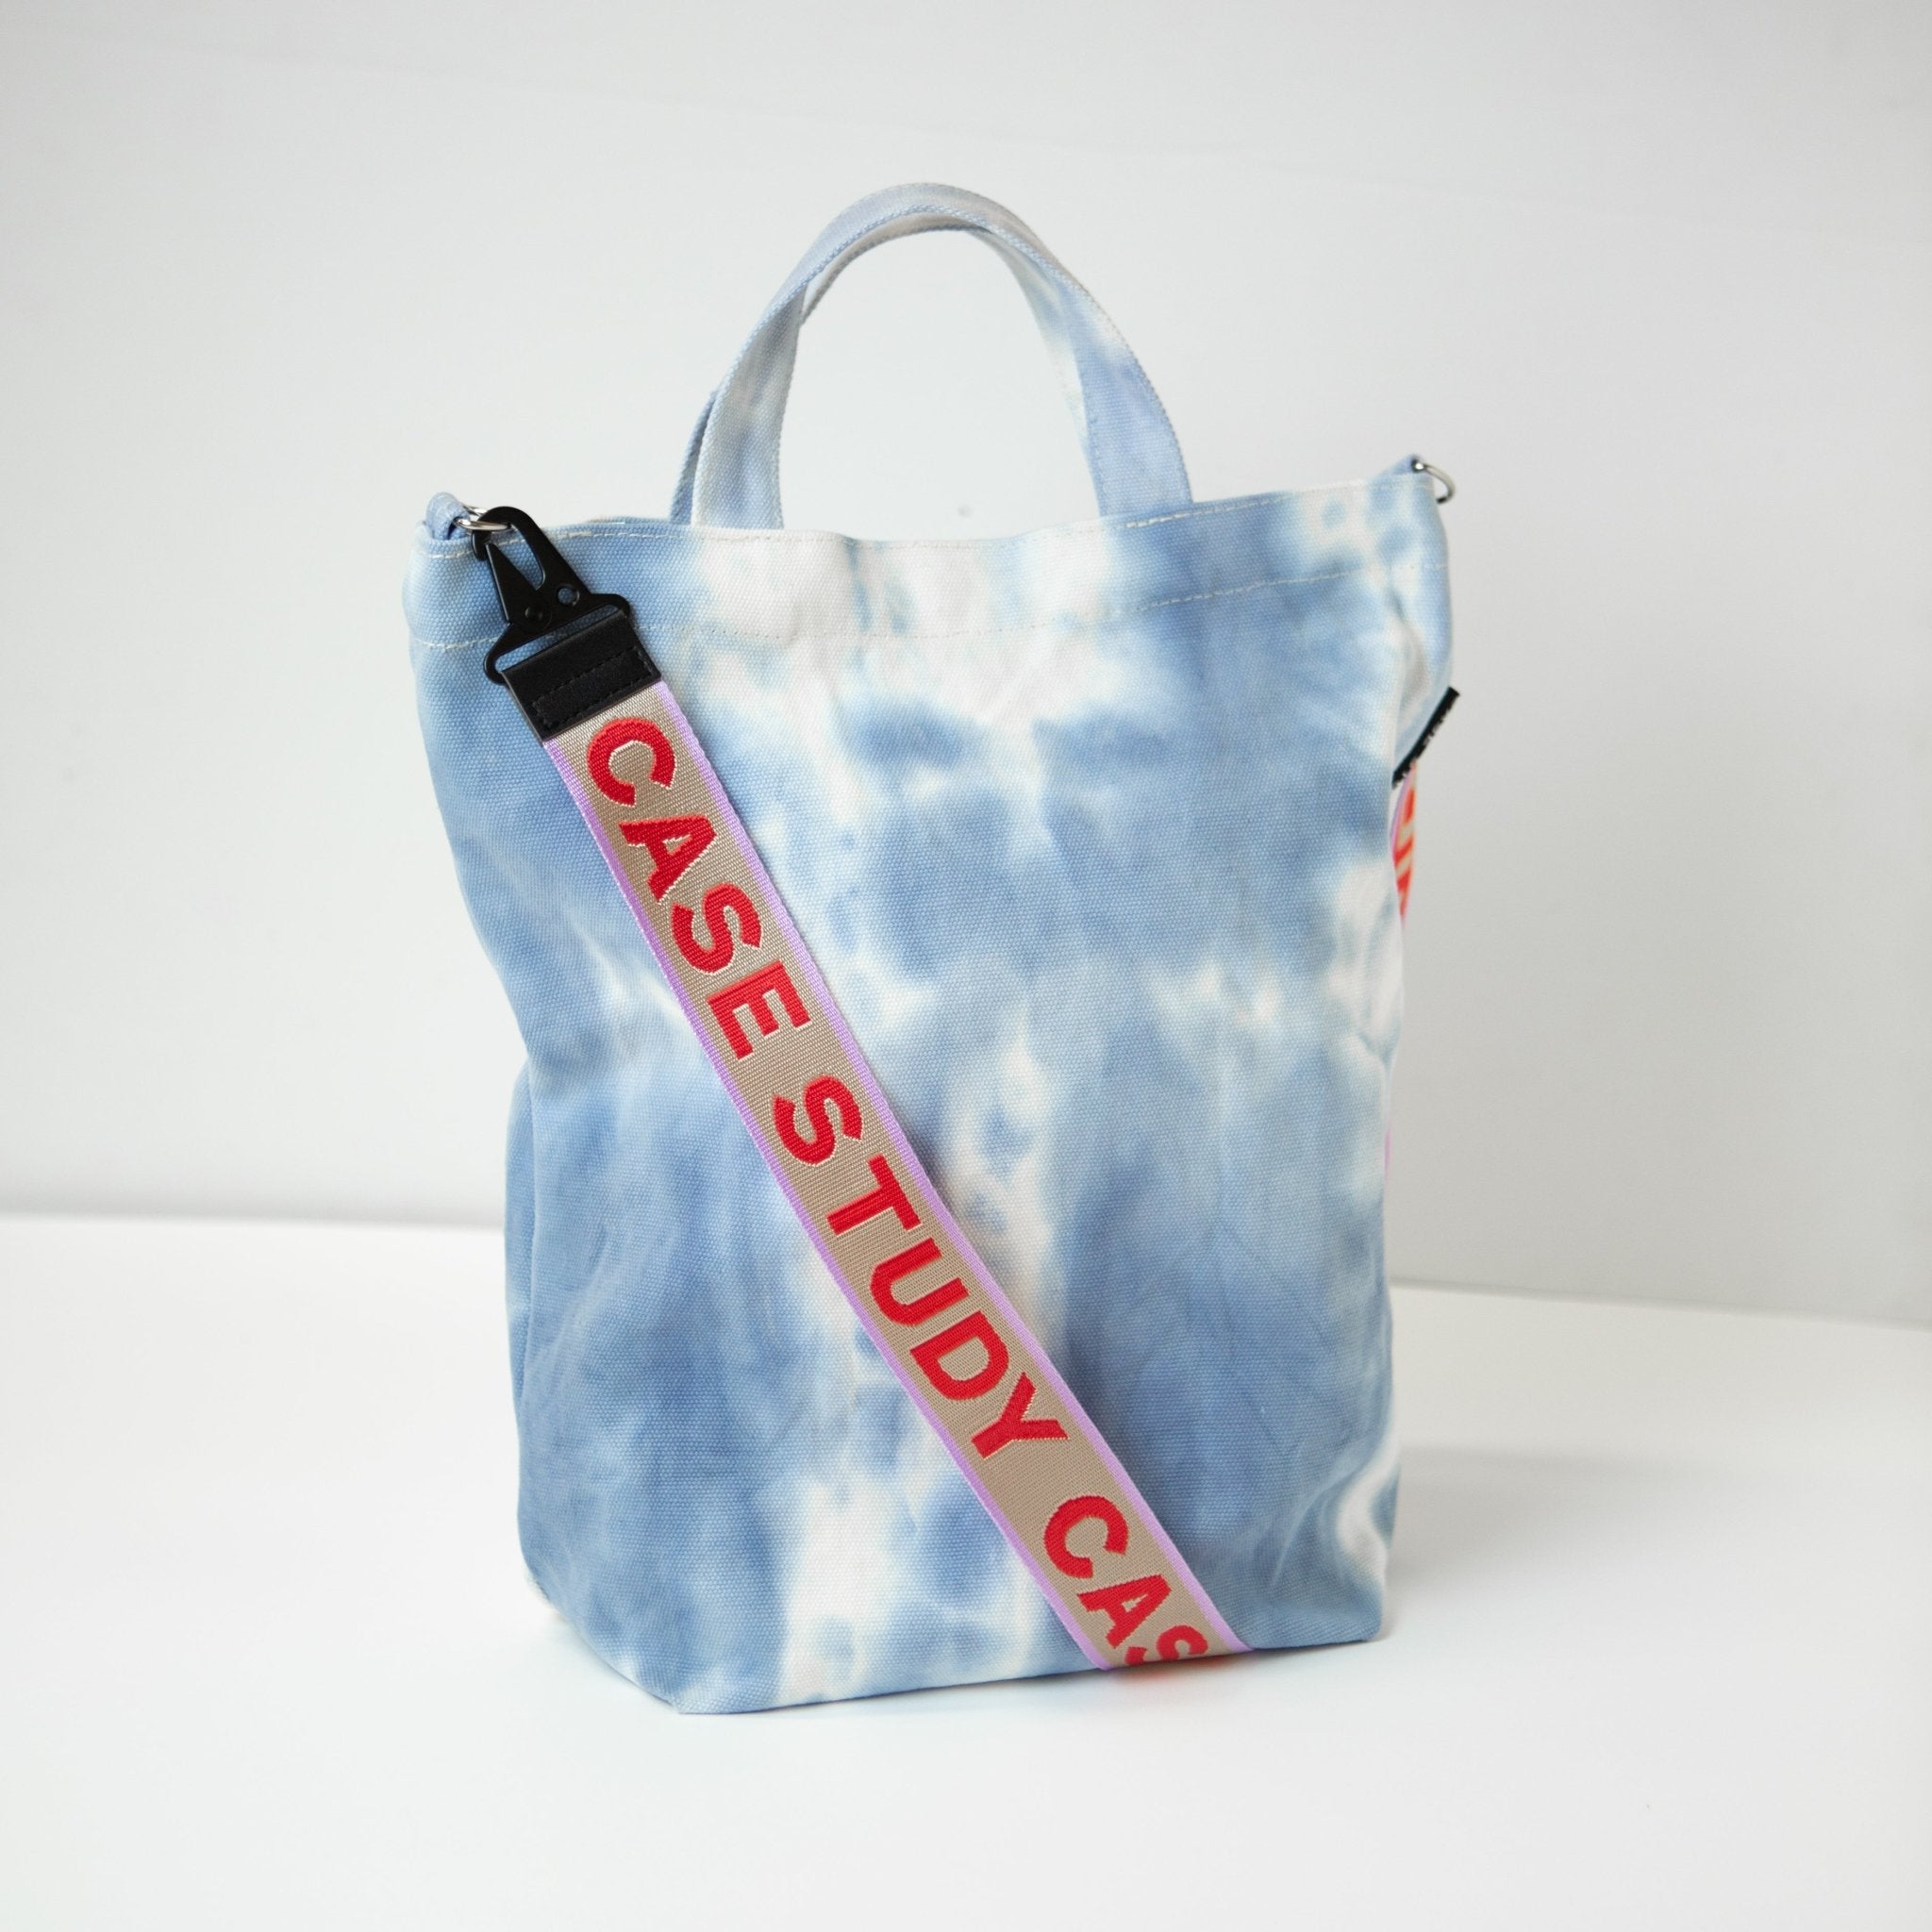 Dyed Tote + Stra tie dyed canvas tote in a pale blue and white color with a red and lavender Case Study crossbody strapap - Cornflower - Case Study